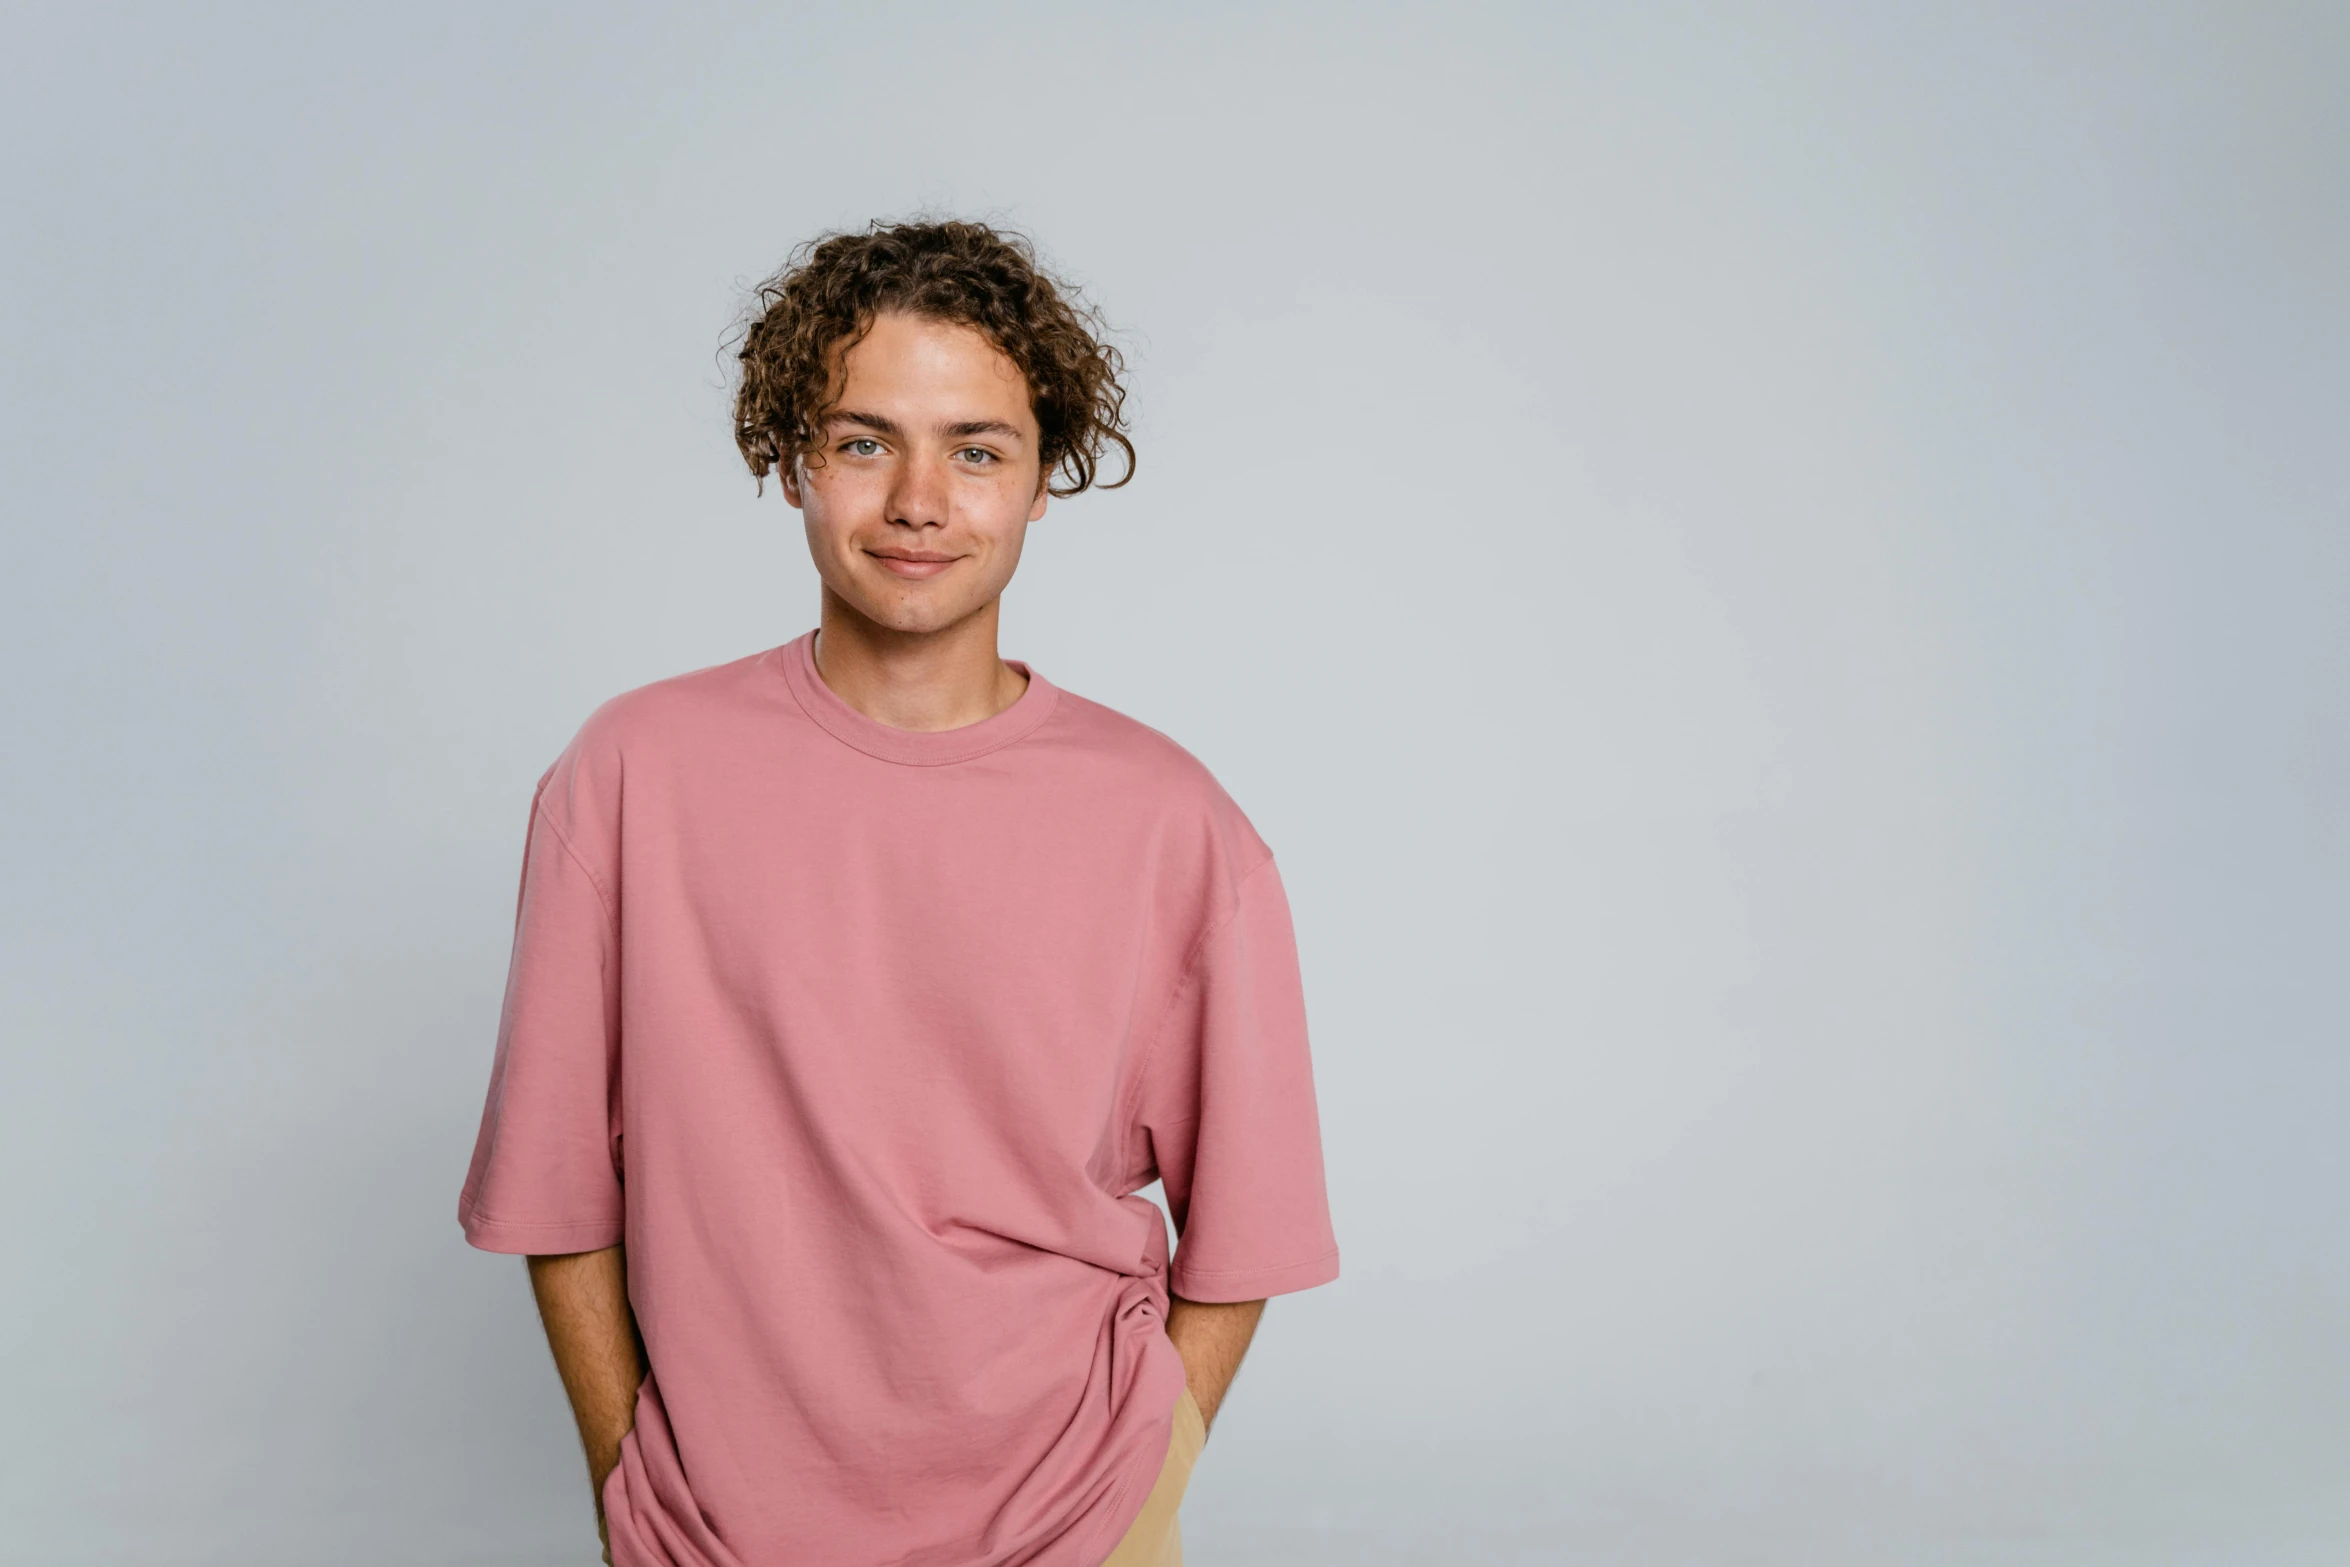 a young man standing with his hands in his pockets, a character portrait, pexels contest winner, happening, pink shirt, he has short curly brown hair, productphoto, teenage girl